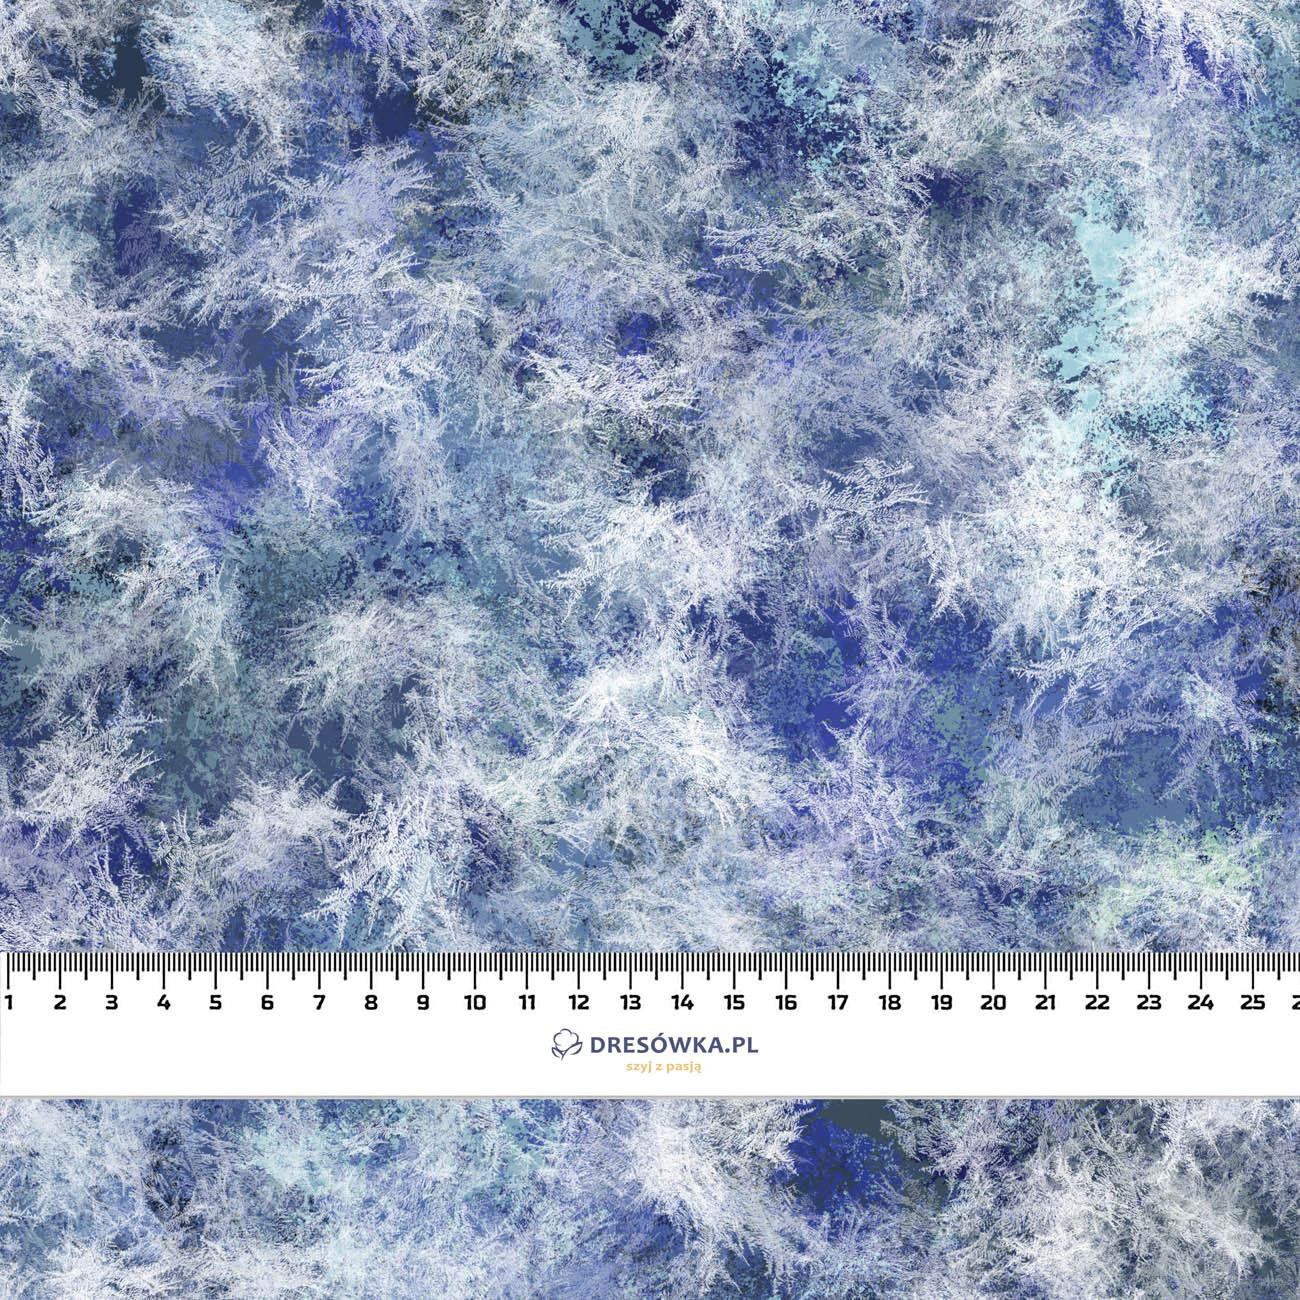 FROST PAT. 2 (WINTER IS COMING) - Cotton woven fabric